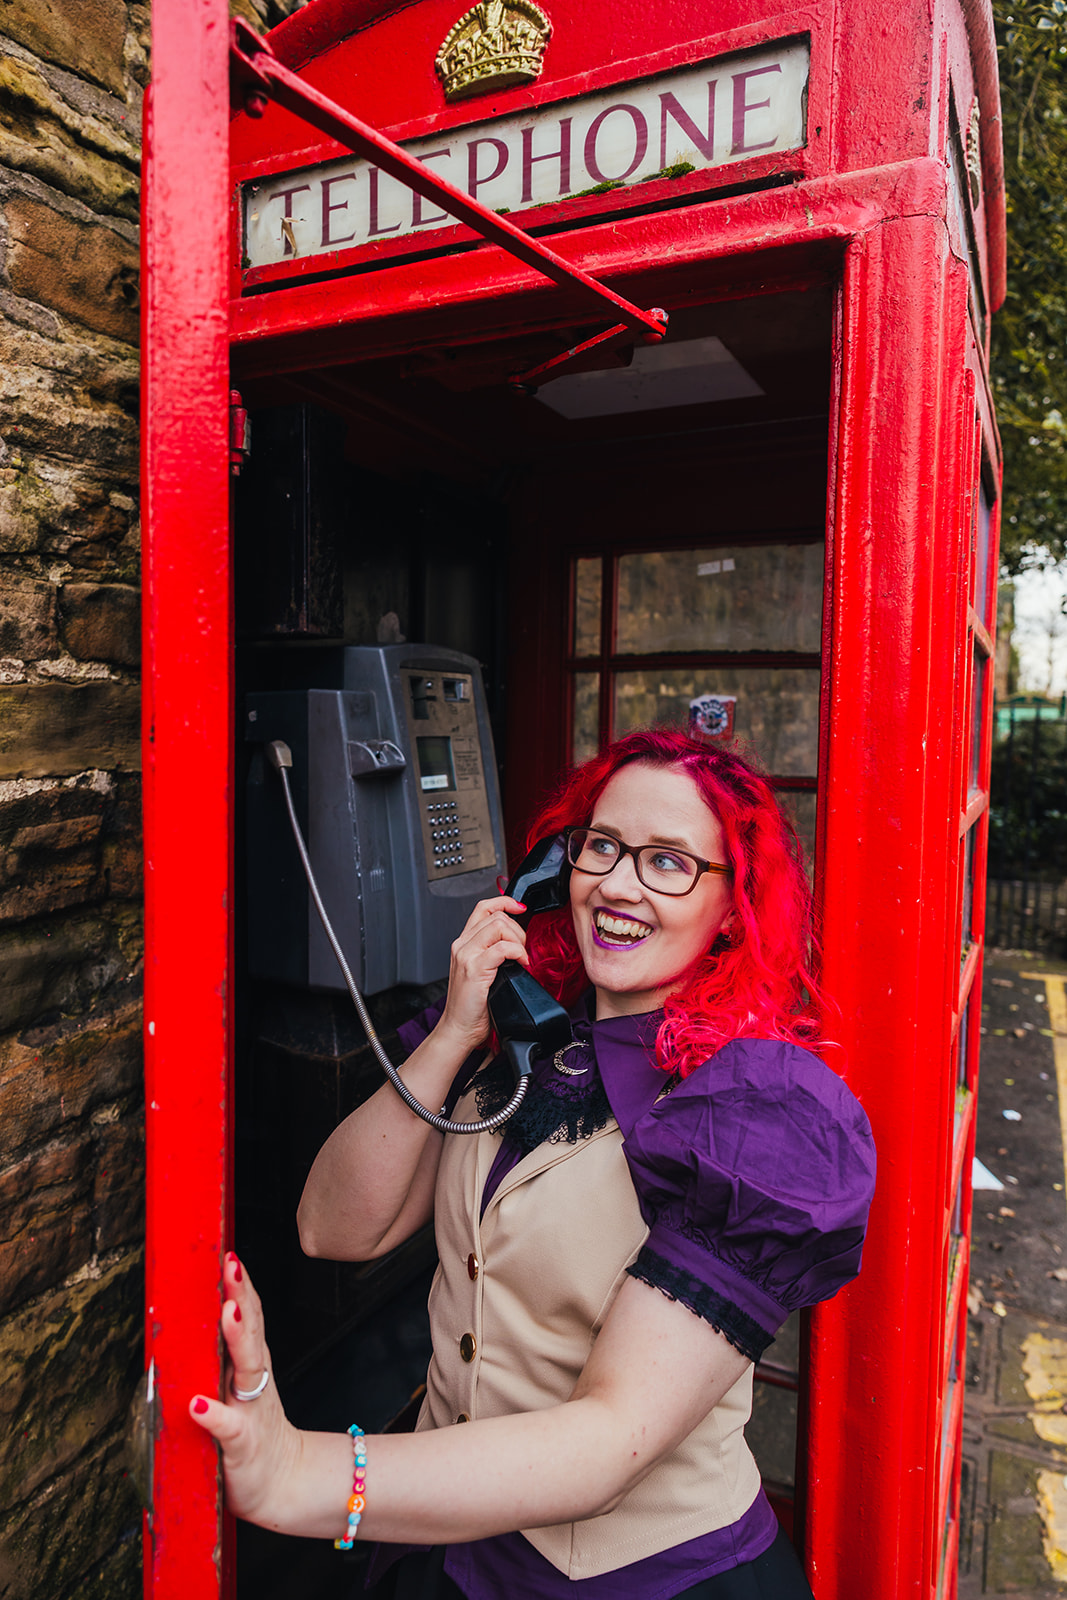 Natalie stands in the doorway of a traditional red telephone box, holding the black phone to her ear and with a big smile on her face.